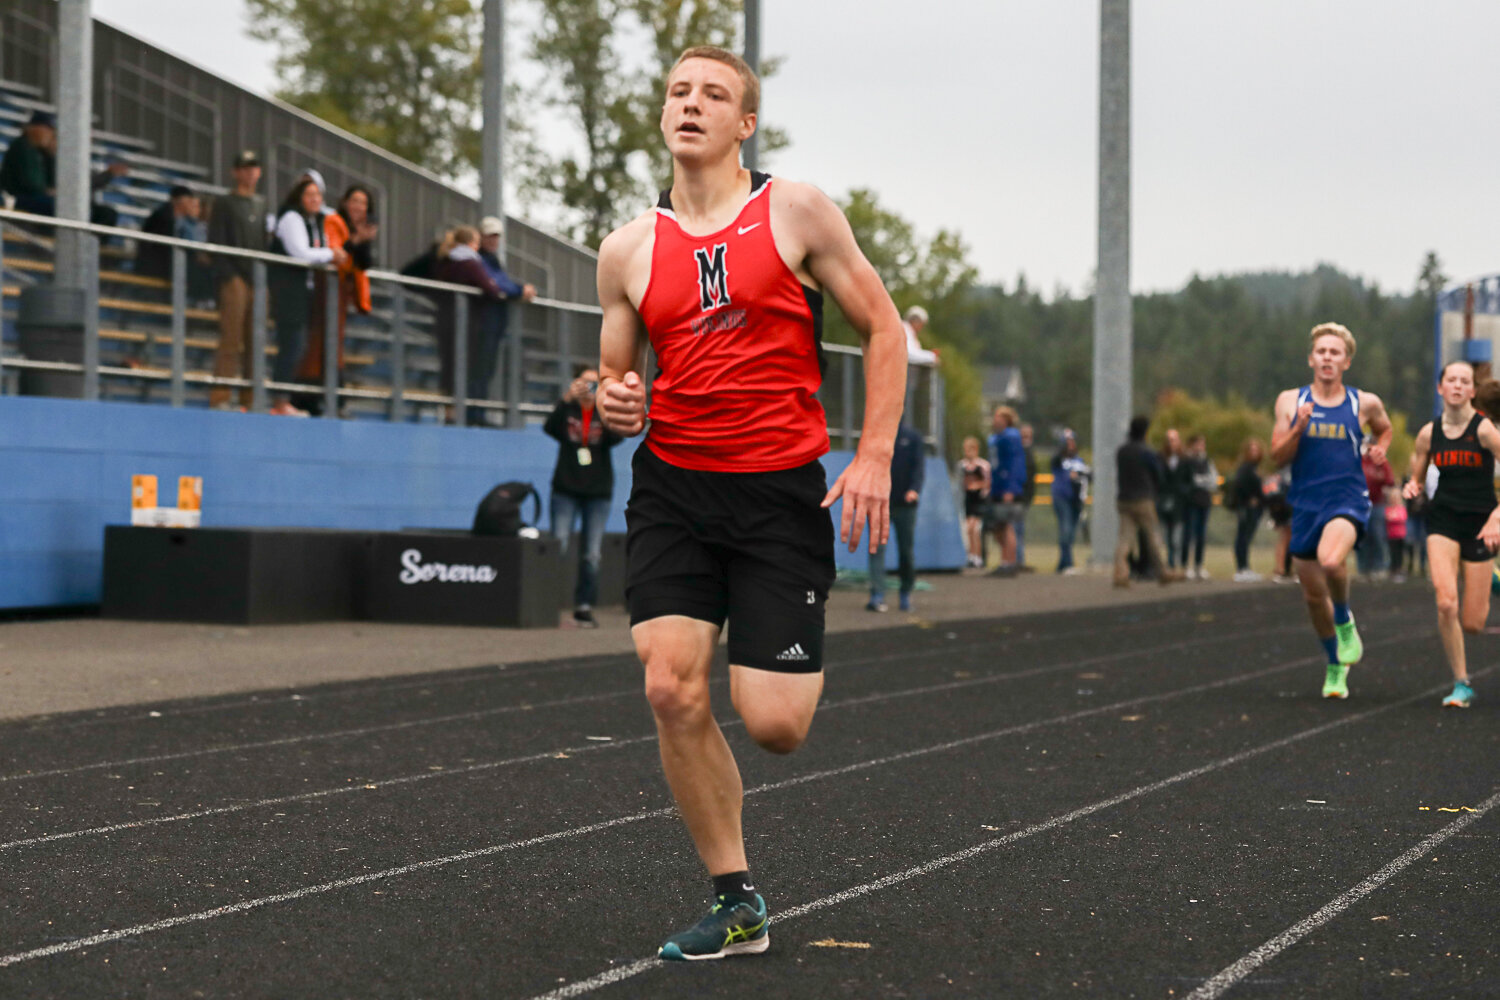 Mossyrock's Ethan Wedam runs the homestretch during a meet at Adna on Sept. 28.